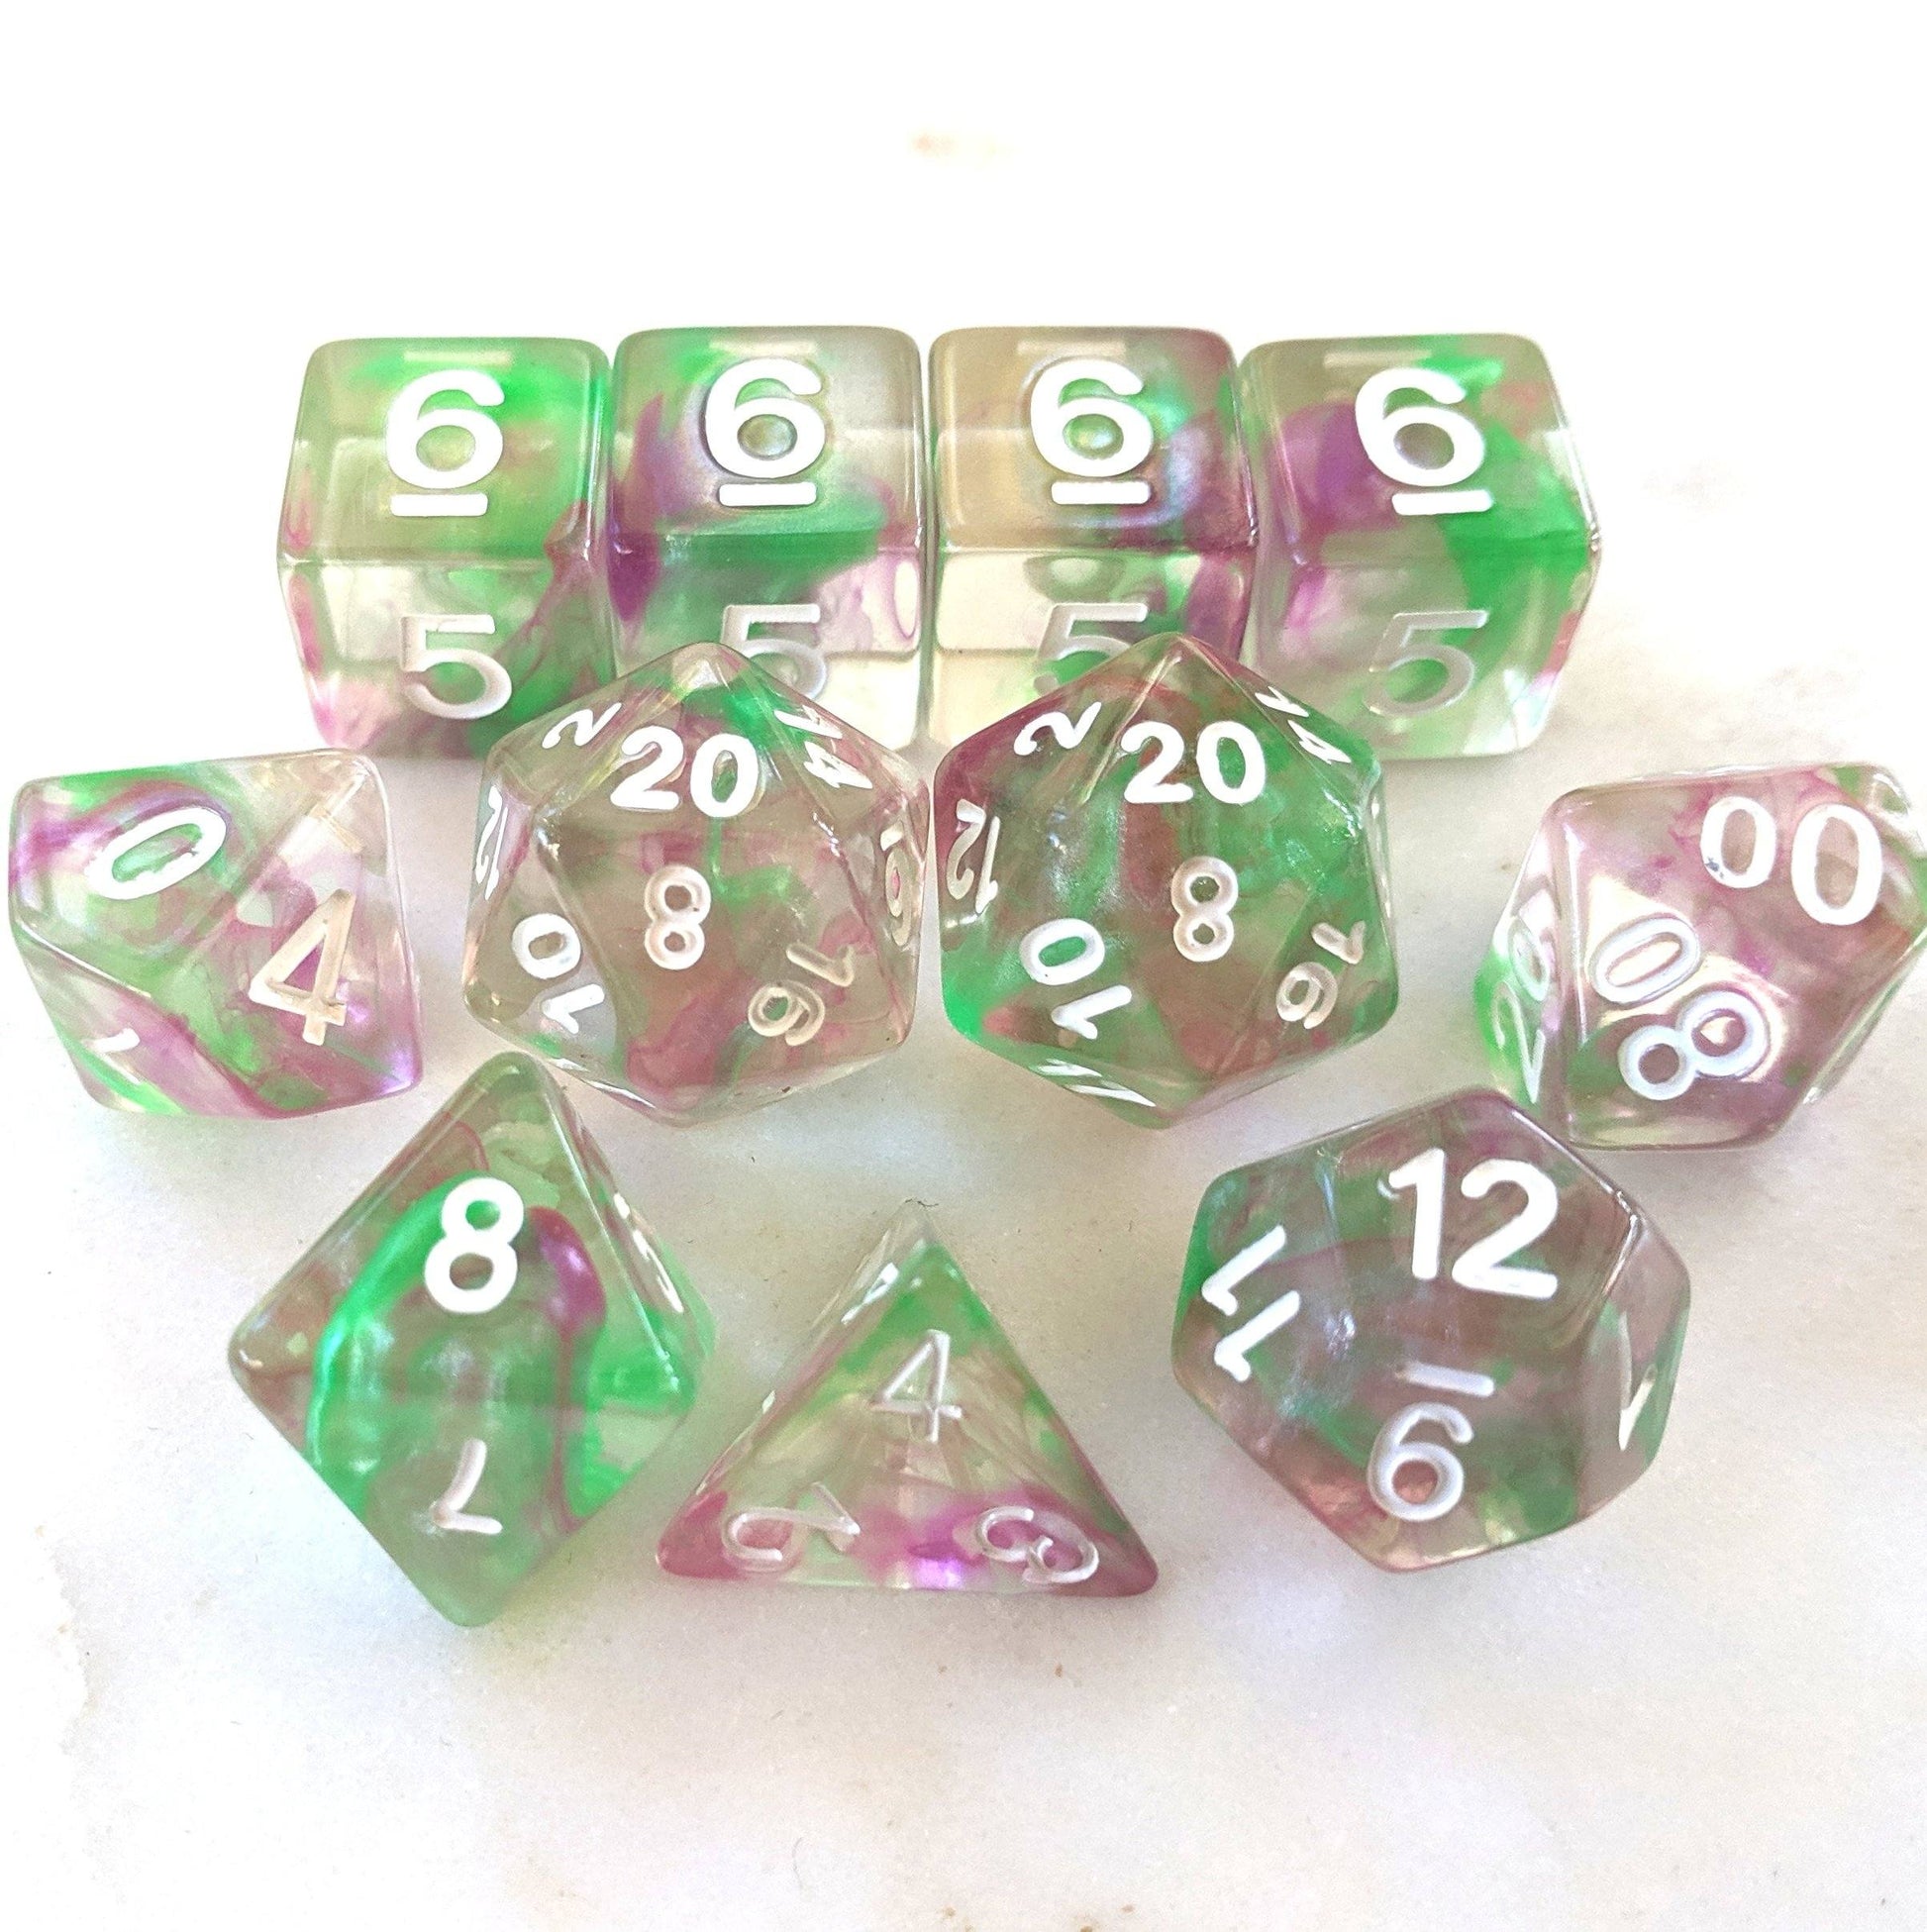 11 Piece Dice Set. Clear Resin with Purple and Green - CozyGamer